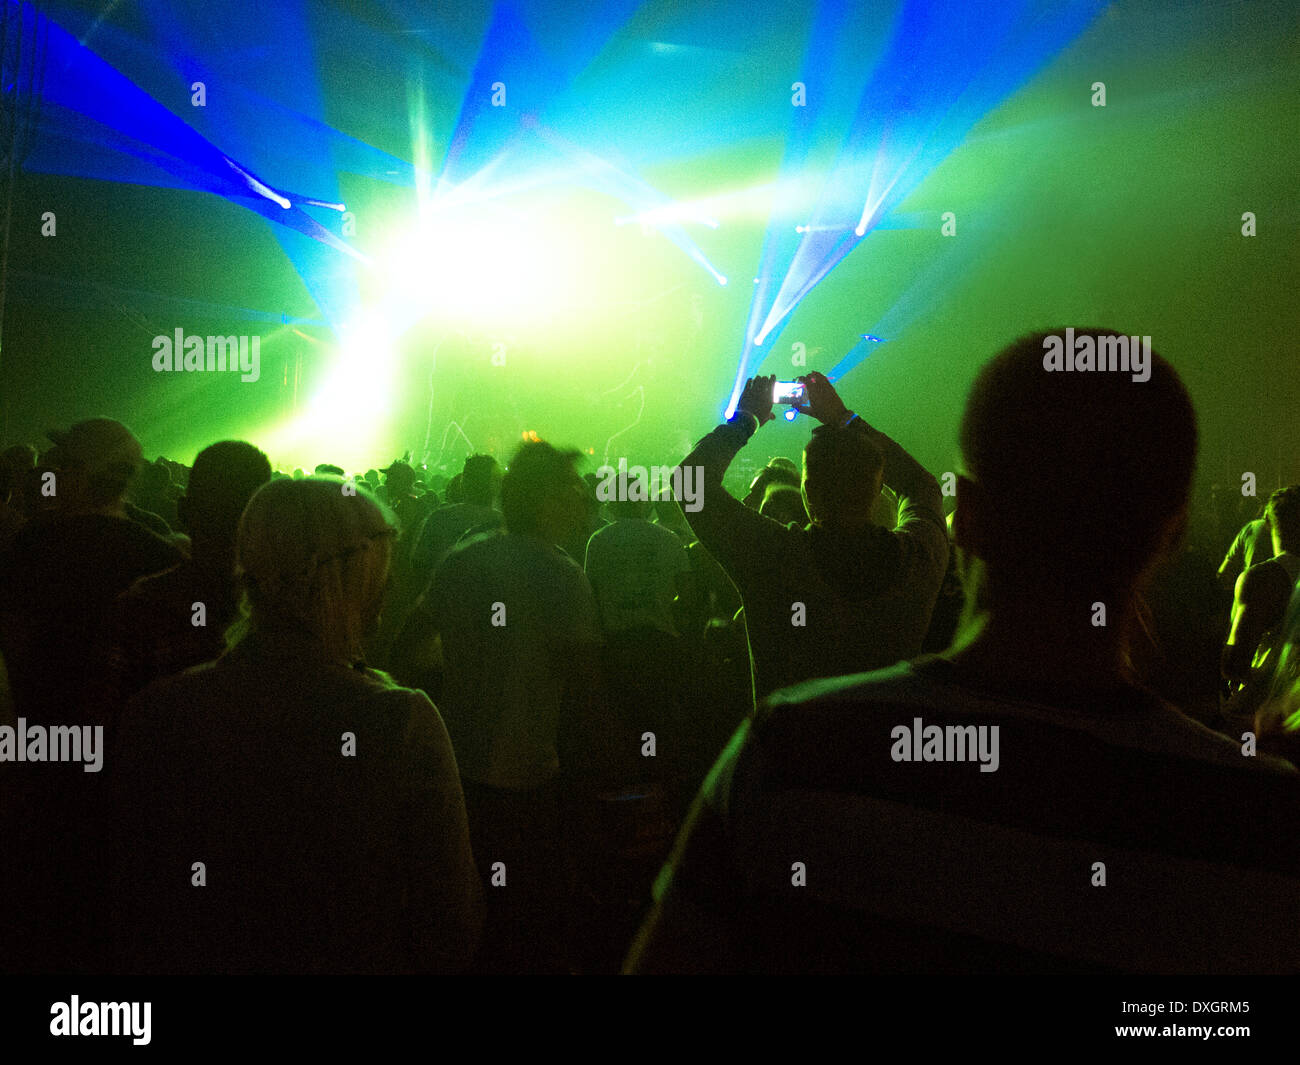 Silhouette of crowd facing illuminated stage at music festival Stock Photo